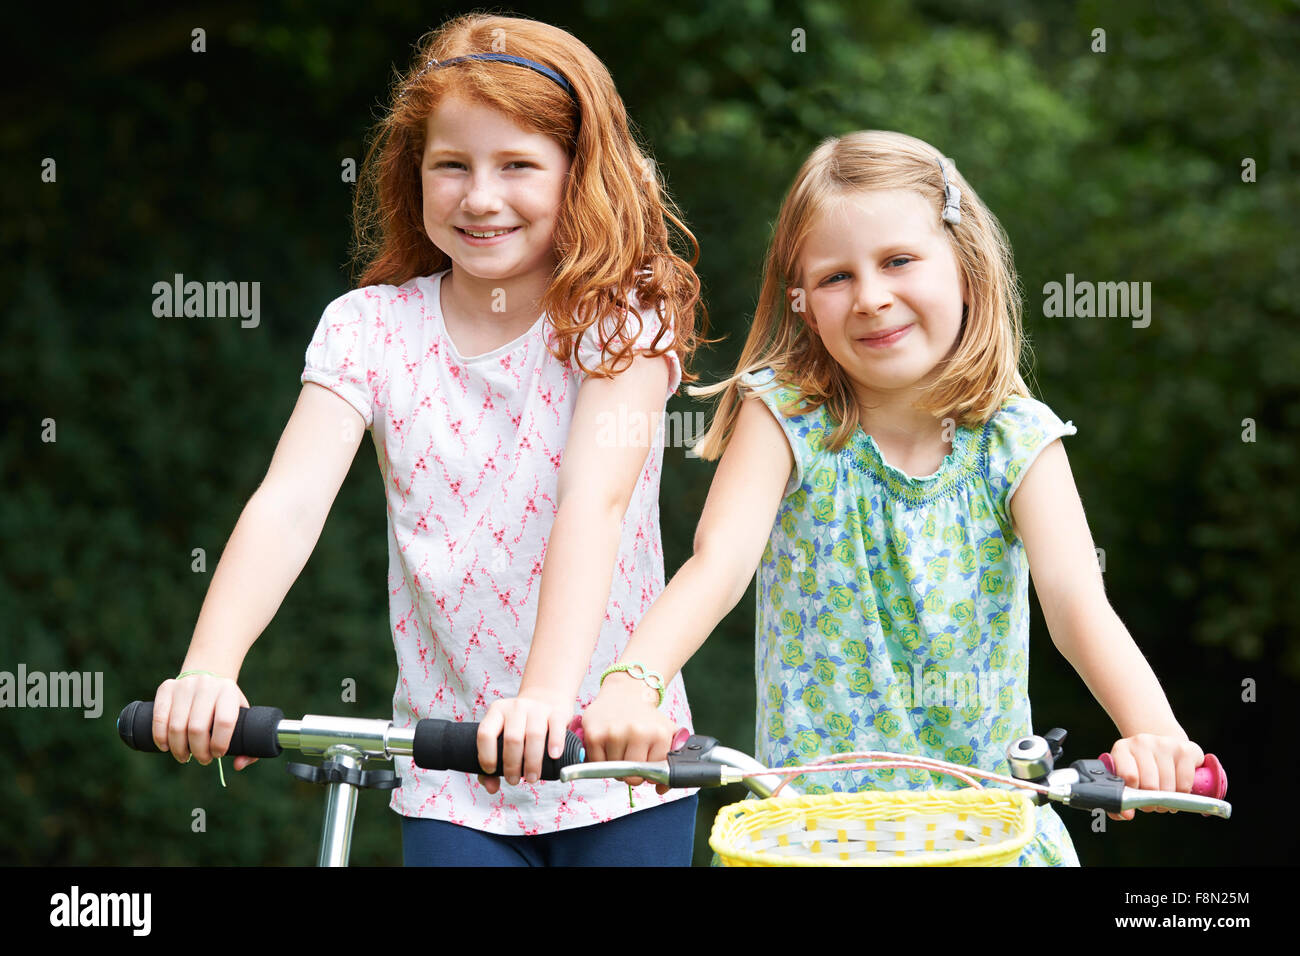 Two Girls Playing On Bike And Scooter Outdoors Stock Photo